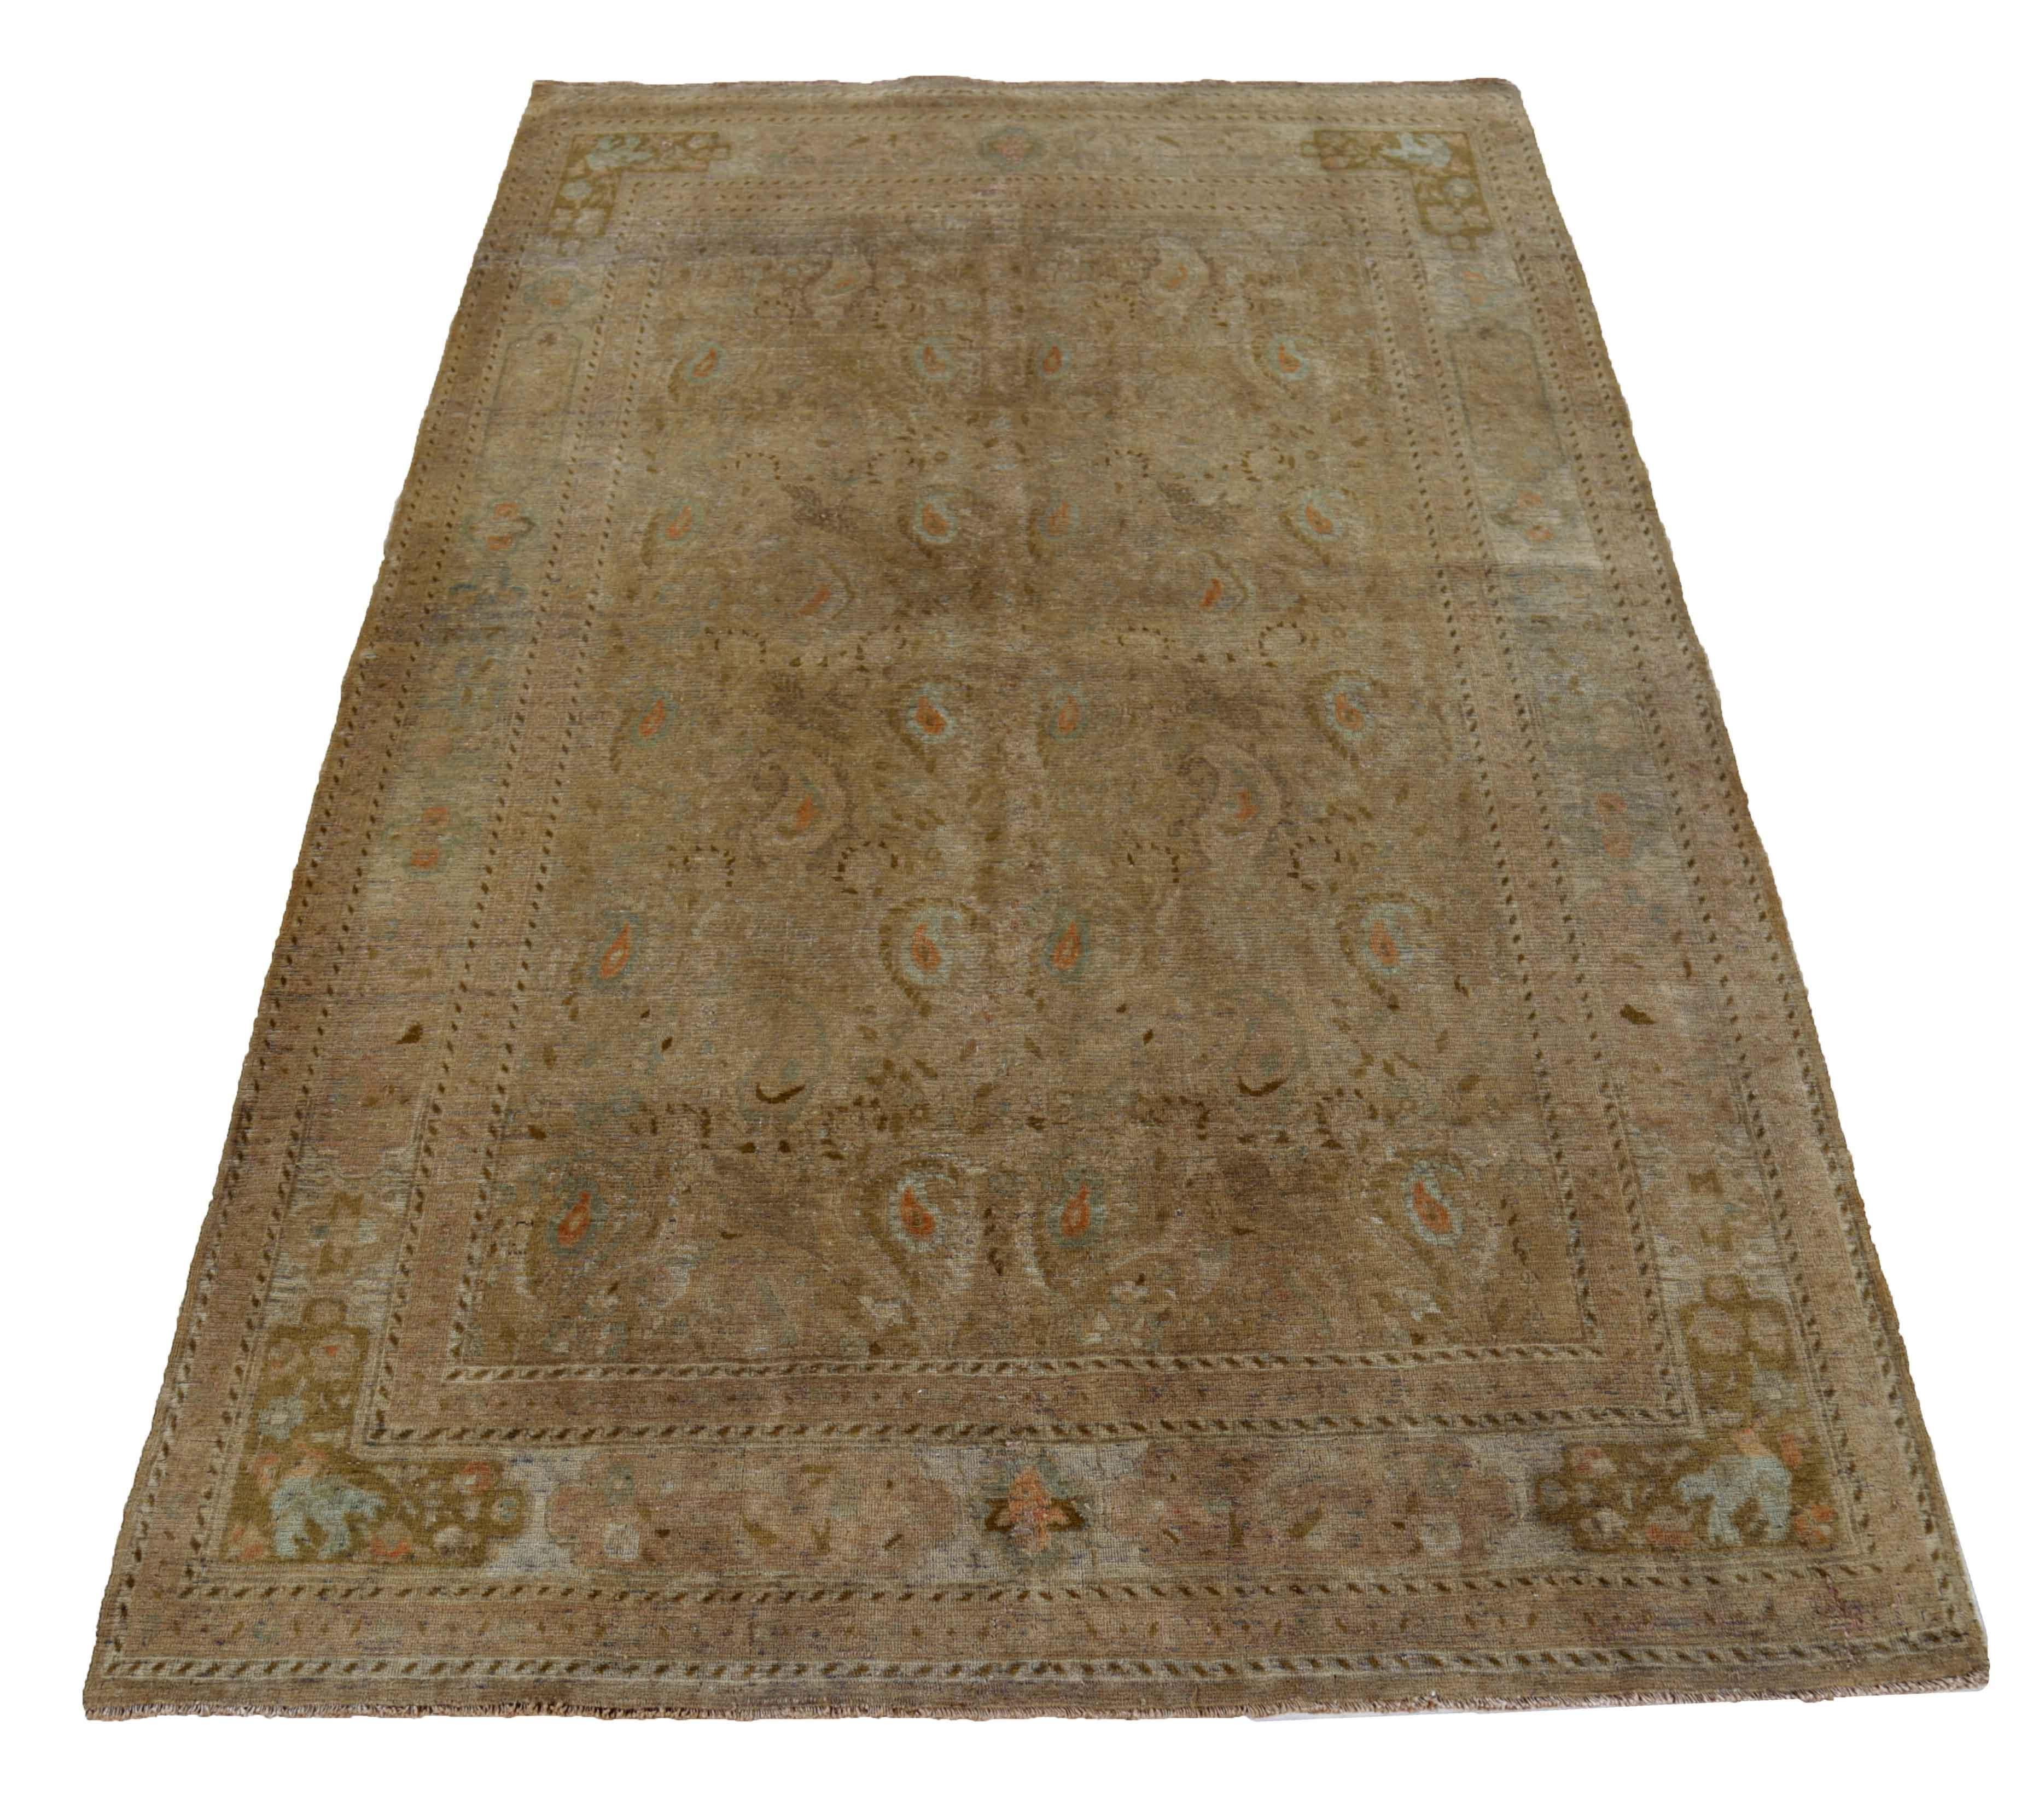 Antique Persian area rug handwoven from the finest sheep’s wool. It’s colored with all-natural vegetable dyes that are safe for humans and pets. It’s a traditional Bijar design handwoven by expert artisans. It’s a lovely area rug that can be